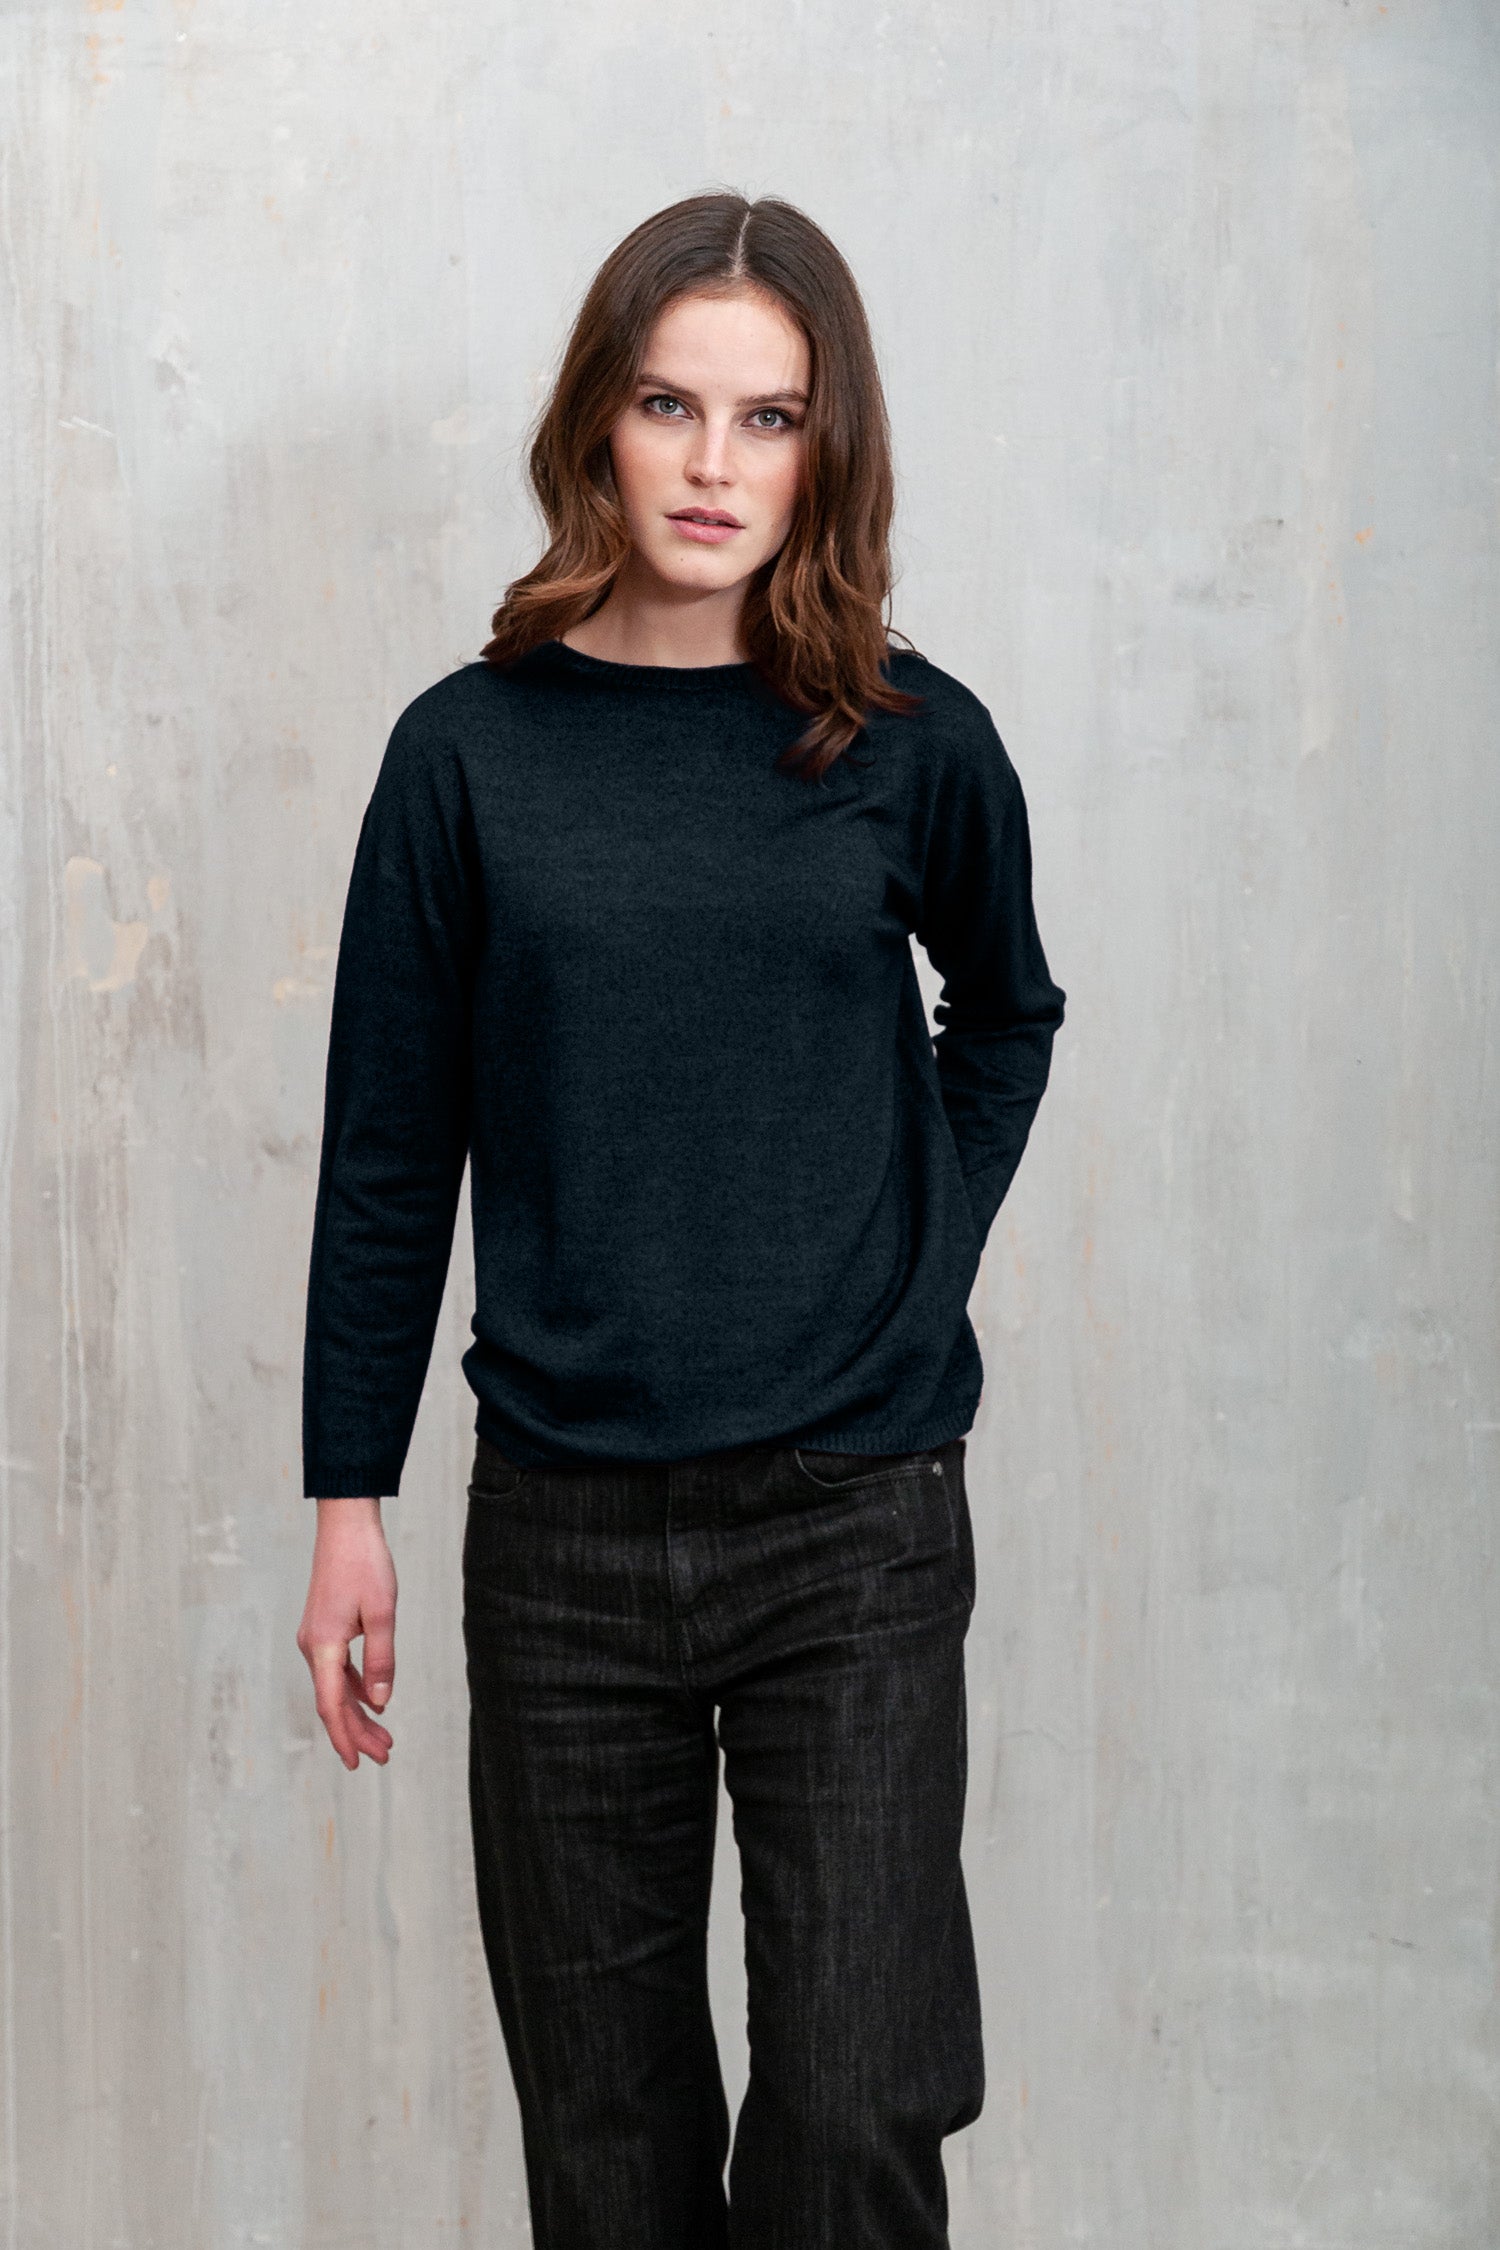 Reay Comfy Sweater - Abyss